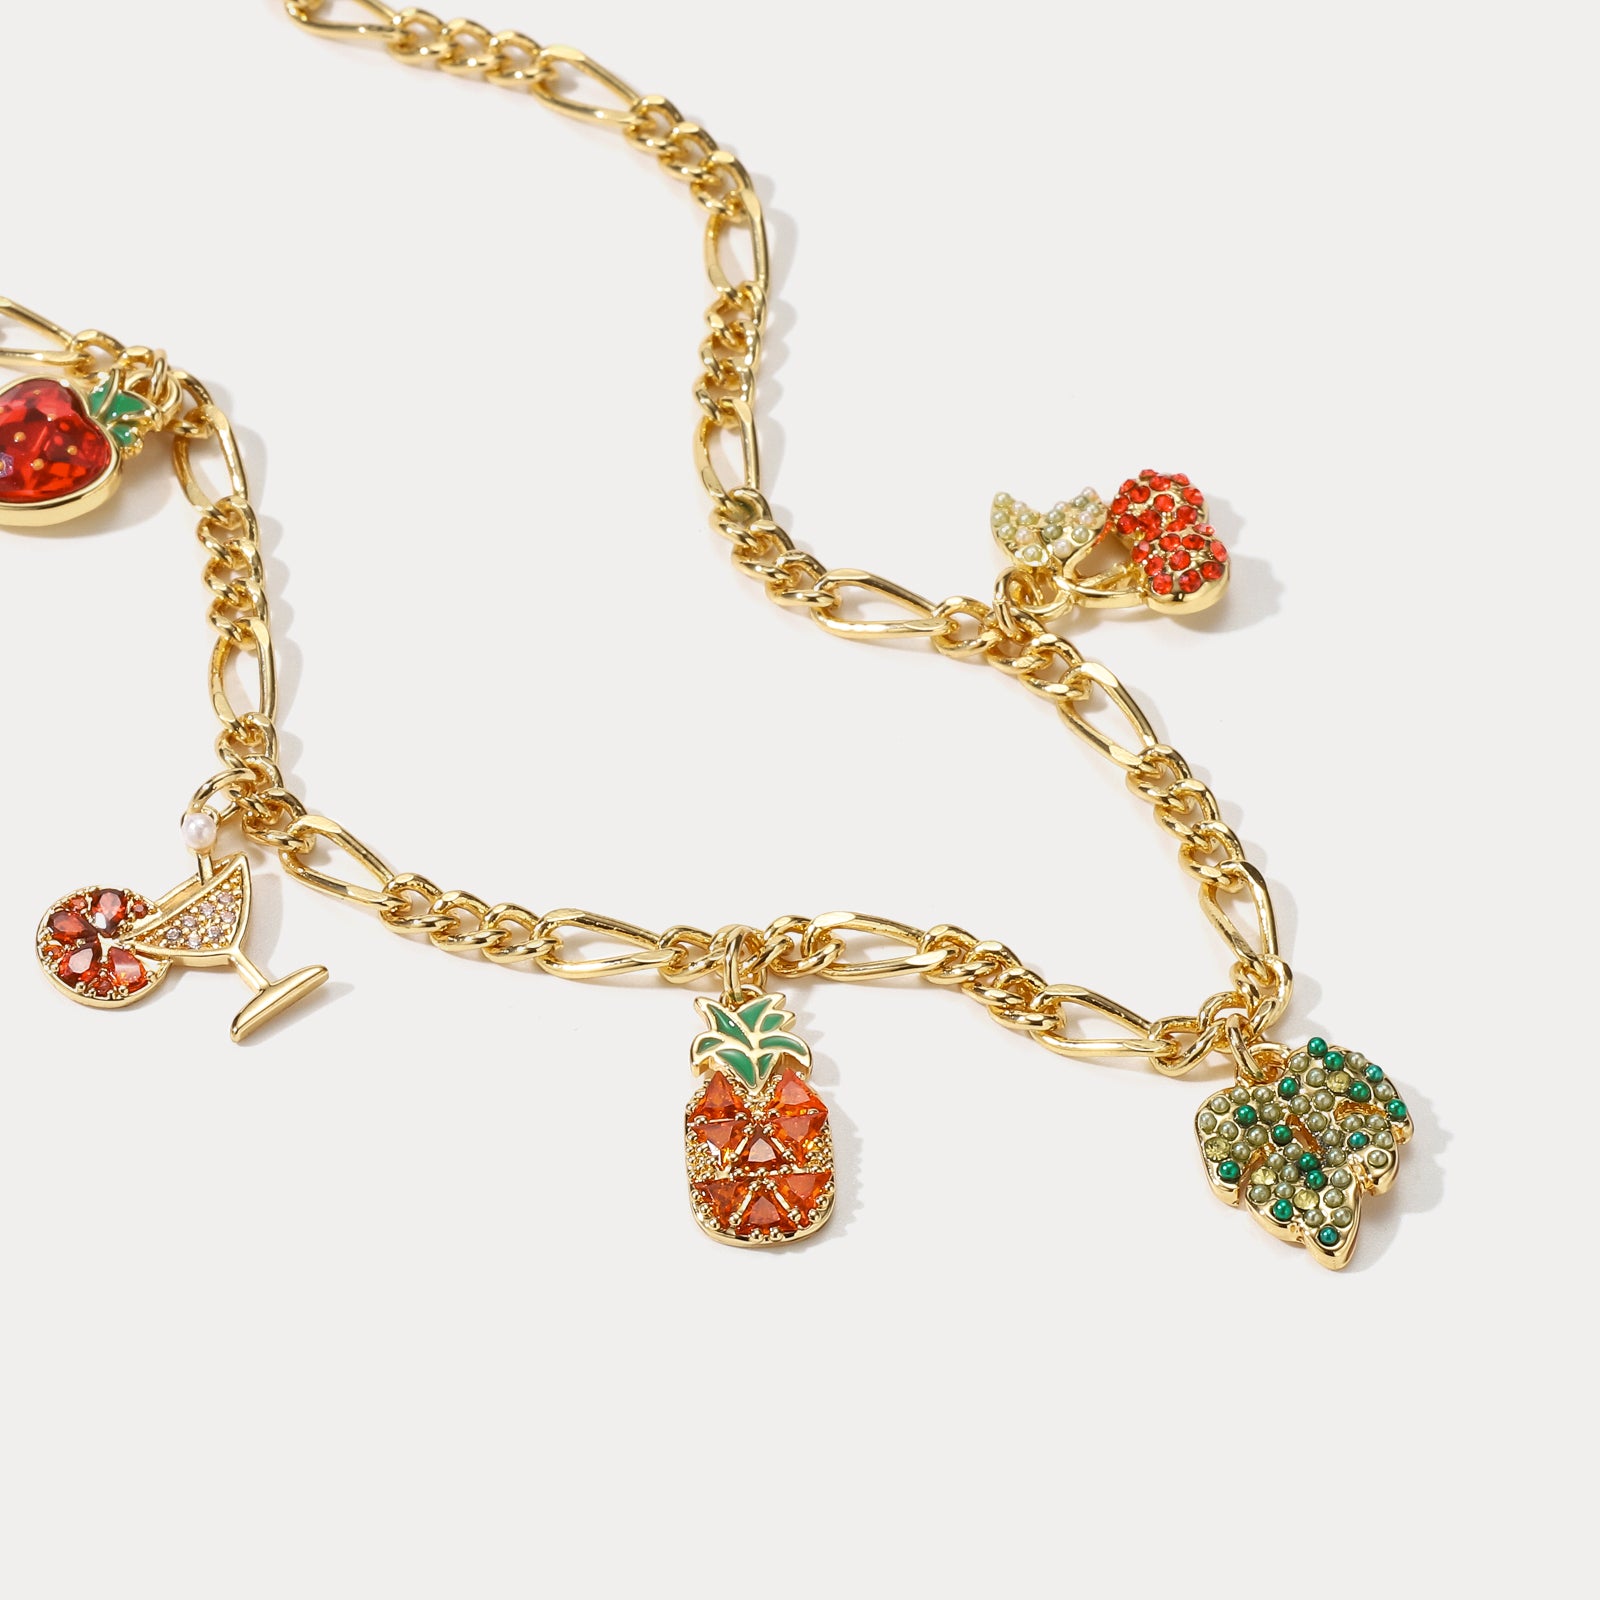 Summer Fruit Chain Necklace